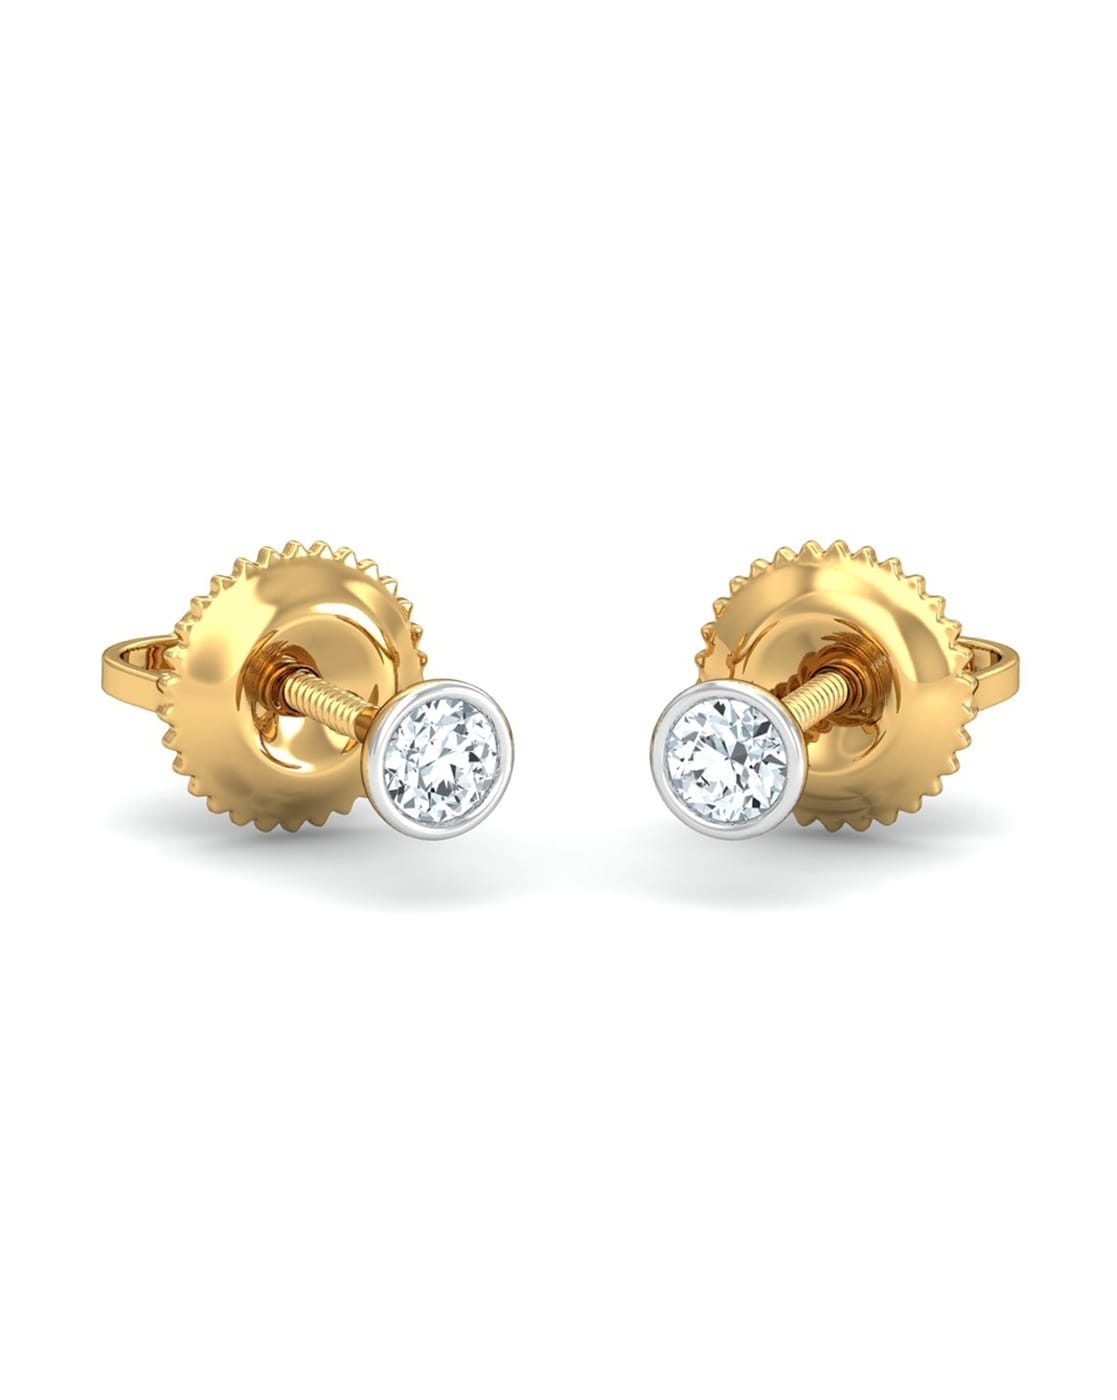 Classy & Stylish Earrings for Men in Gold, Diamond & Platinum - Candere by  Kalyan Jewellers